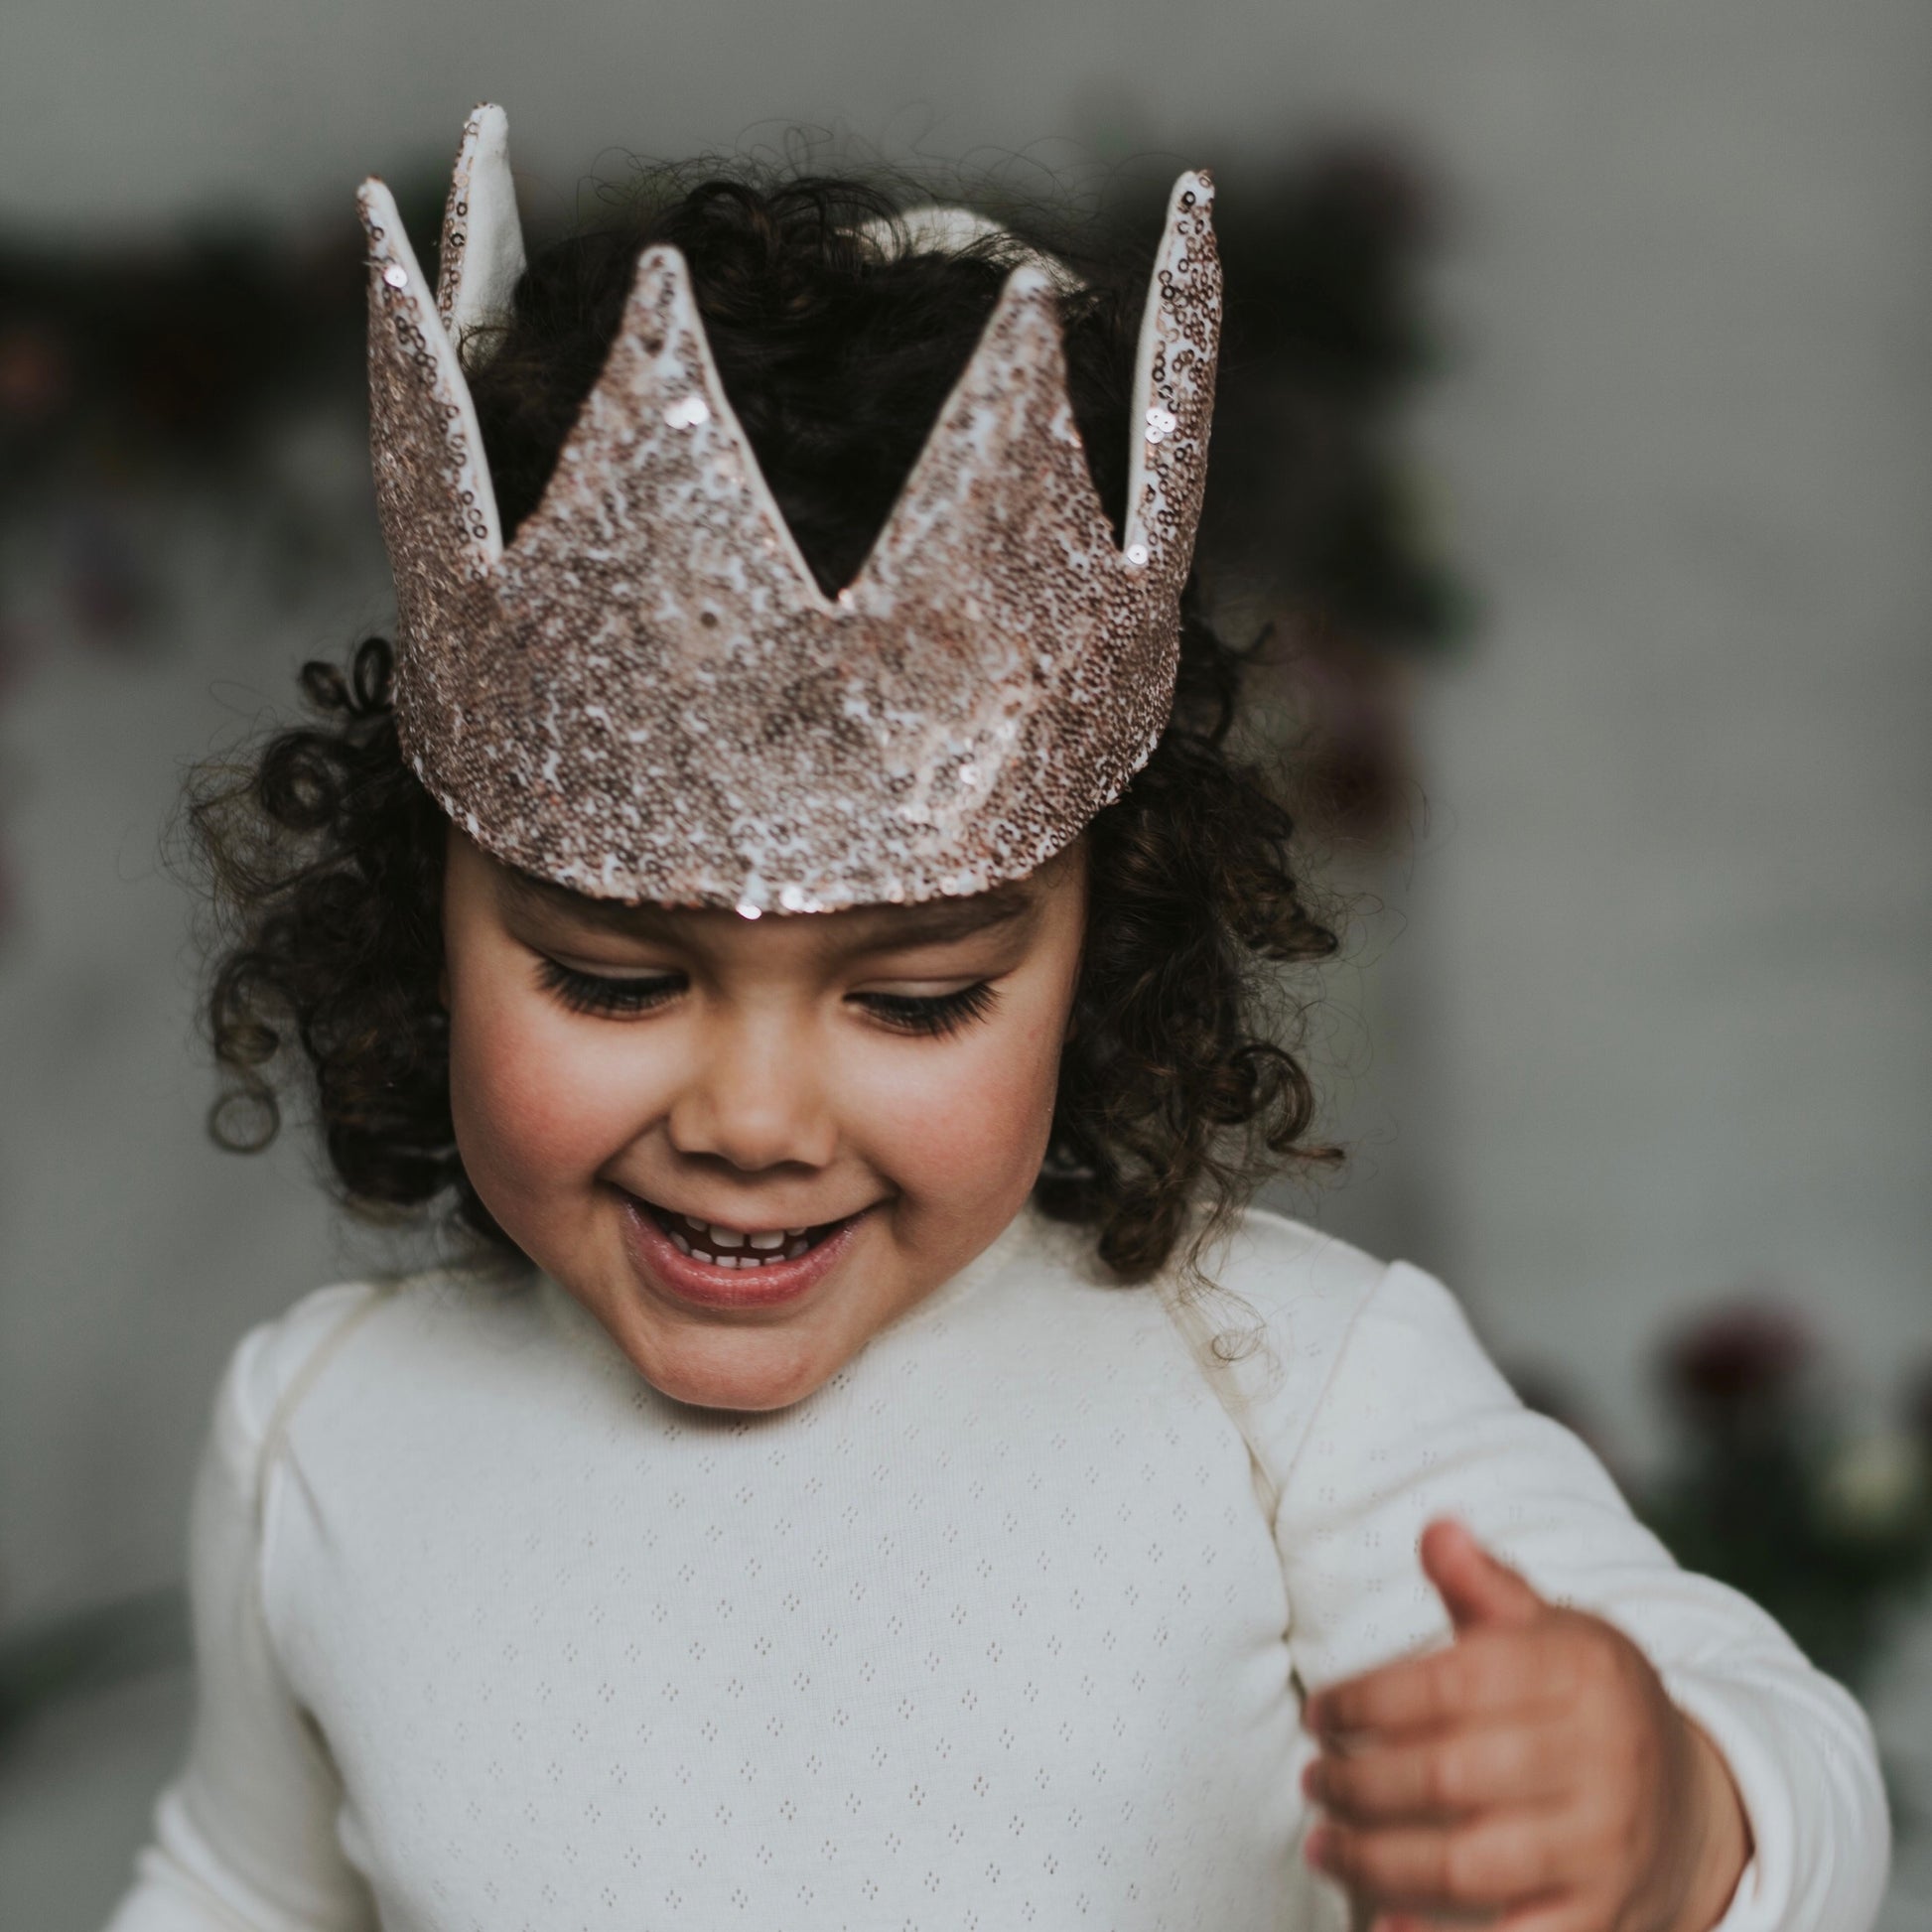 Joyful child with curly hair wearing a handcrafted rose gold sequin crown, smiling during playtime.